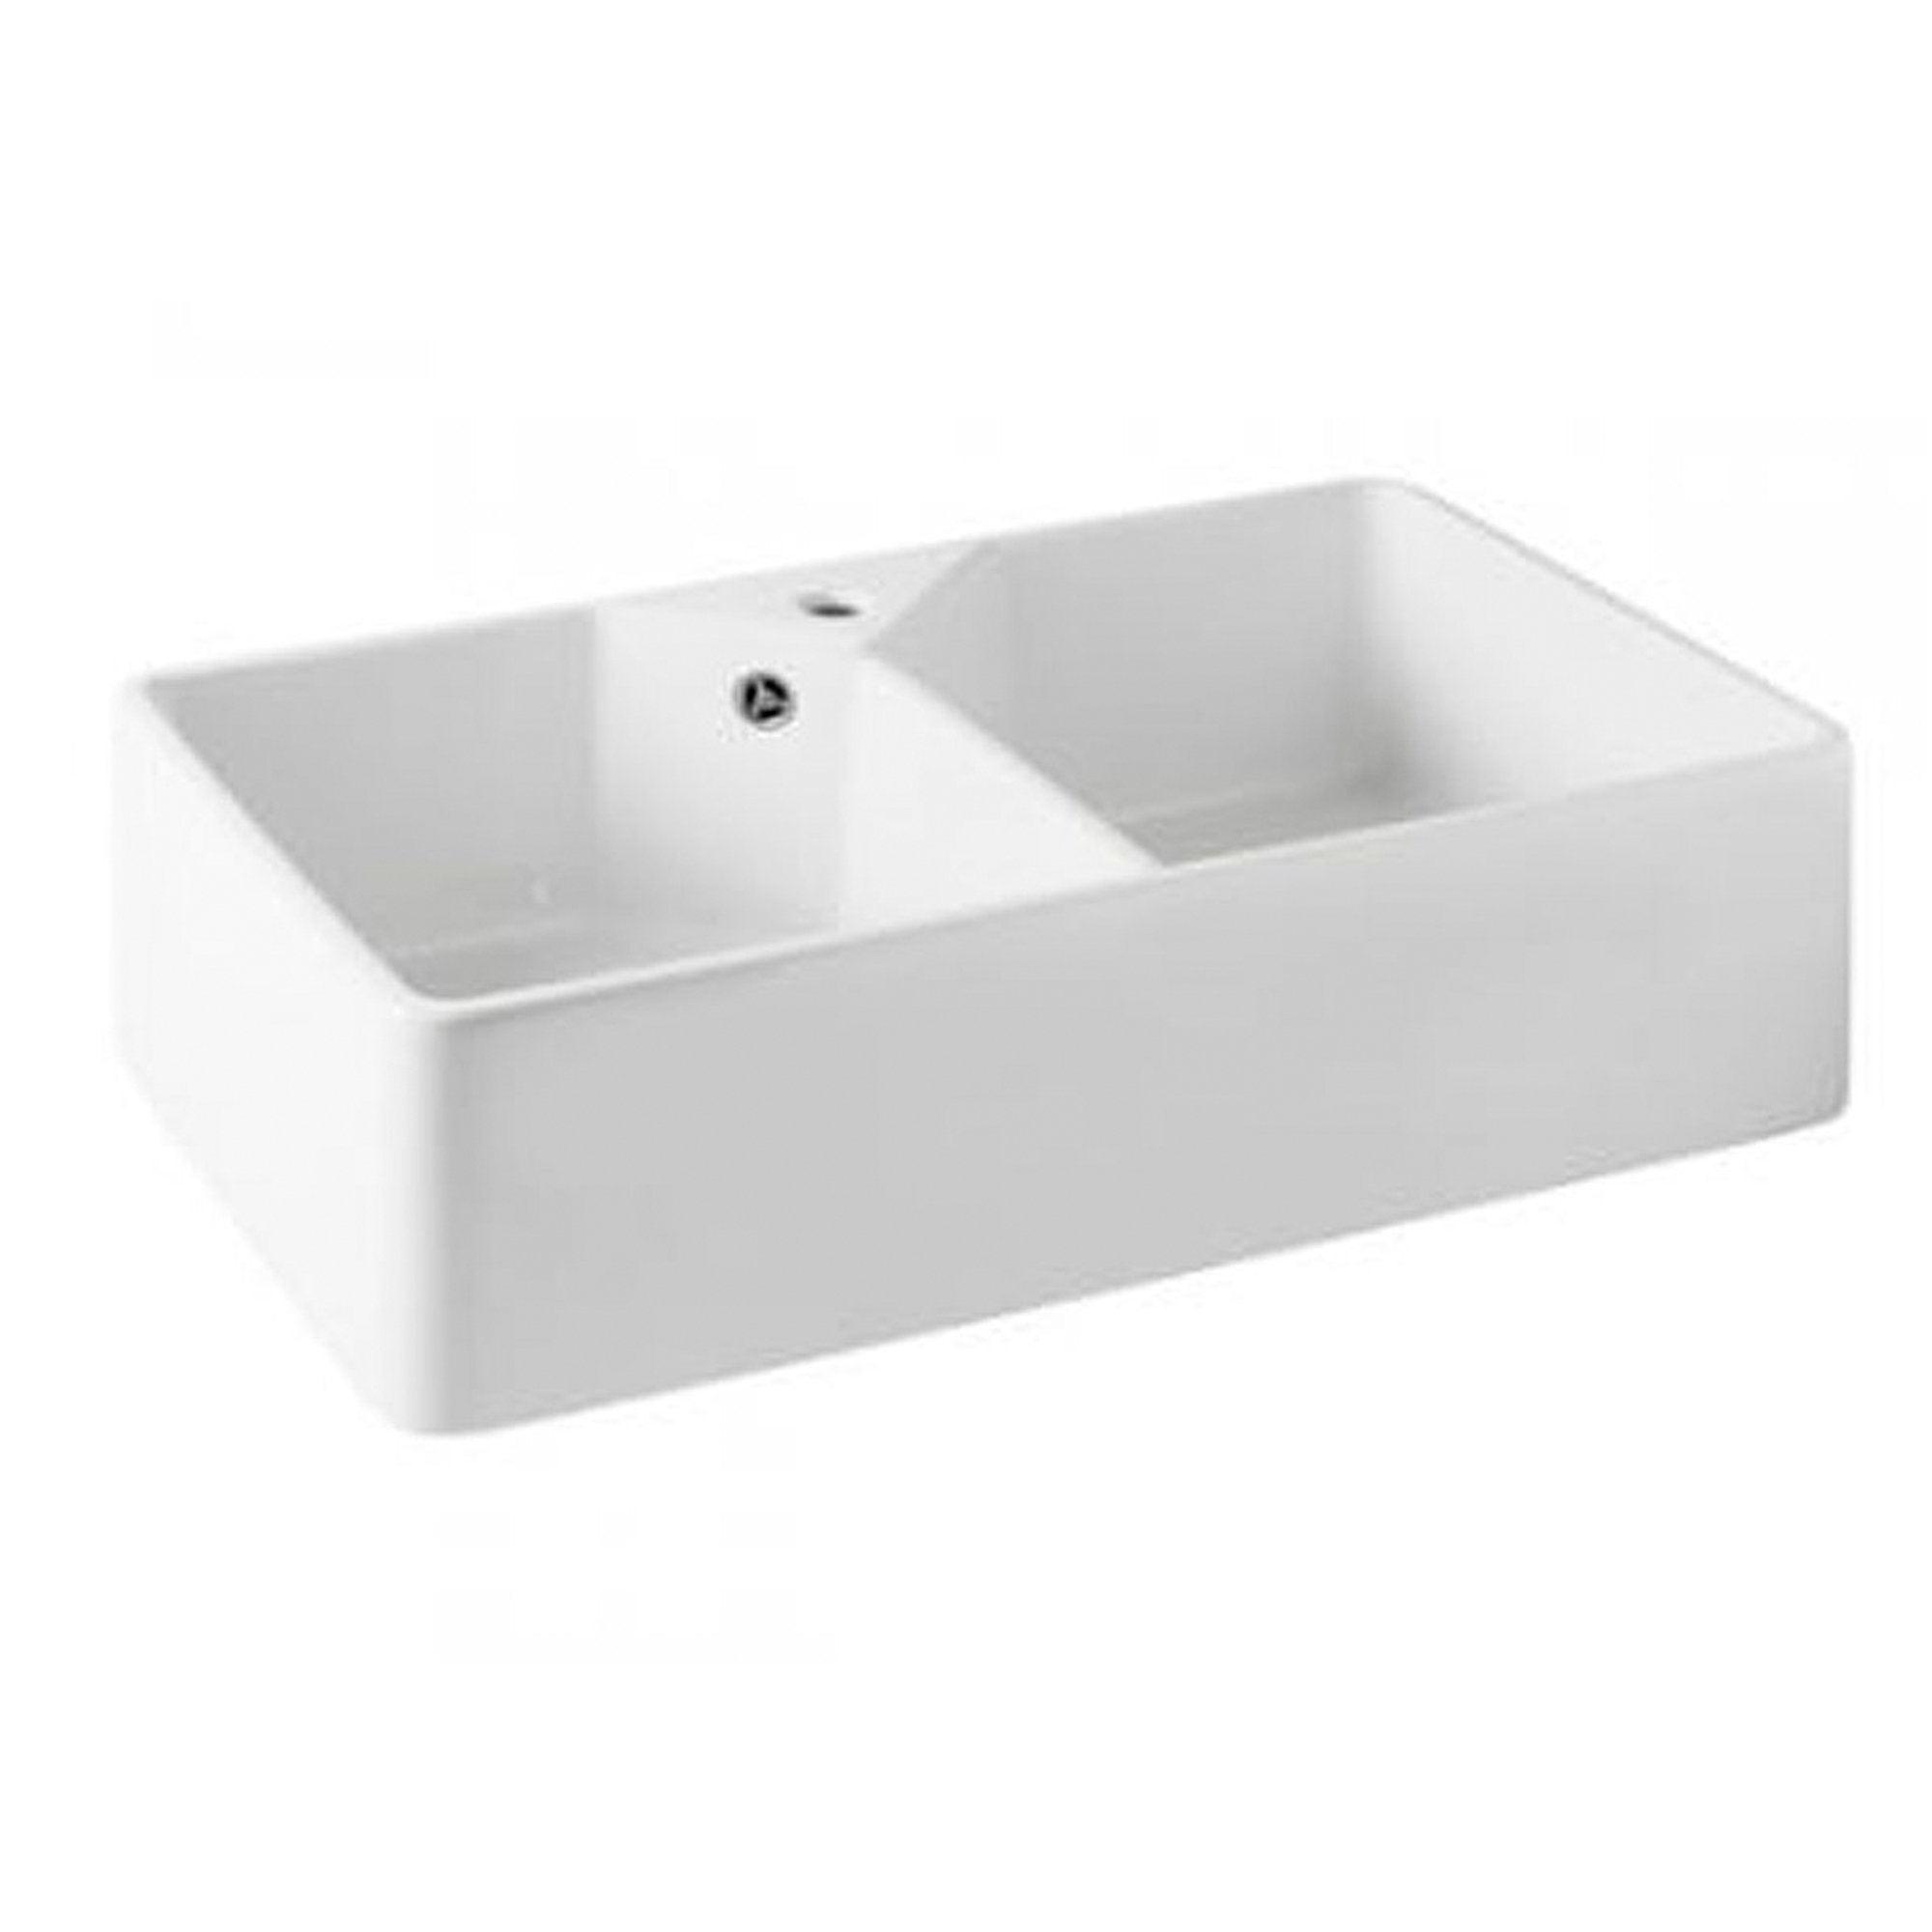 T&H Chester 80 X 50 Double Bowl Fireclay Sink 1Th Including Overflow Kit - Burdens Plumbing